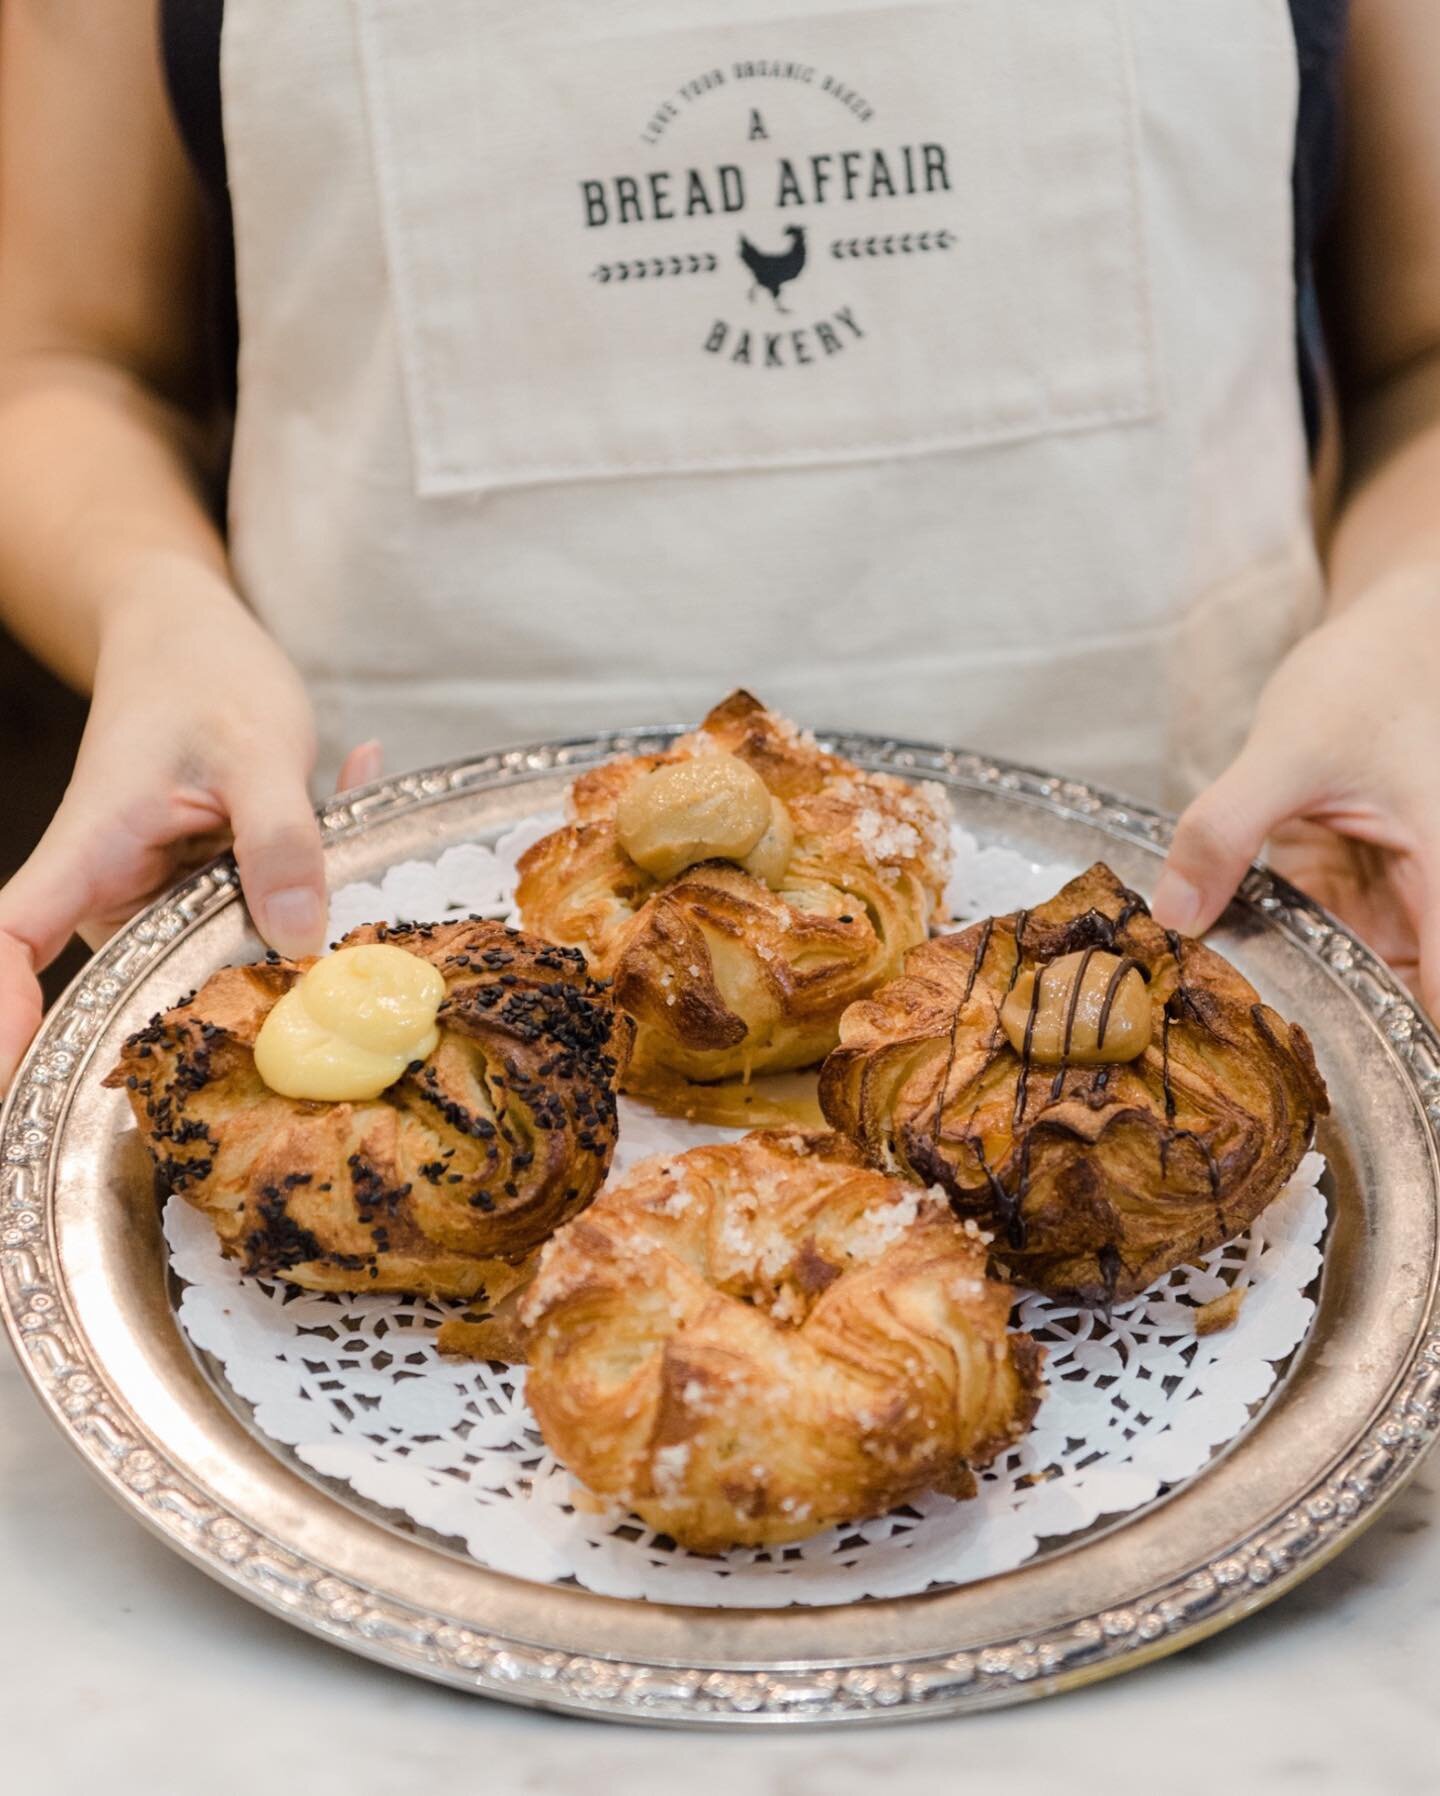 @ABreadAffair has launched Kouign Amann pastries and we&rsquo;re excited coordinate invitations and introduce some of our favourite local foodies to this well-loved bakery on @Granville_Island for a taste throughout March and April.
&mdash;&mdash;
Fo